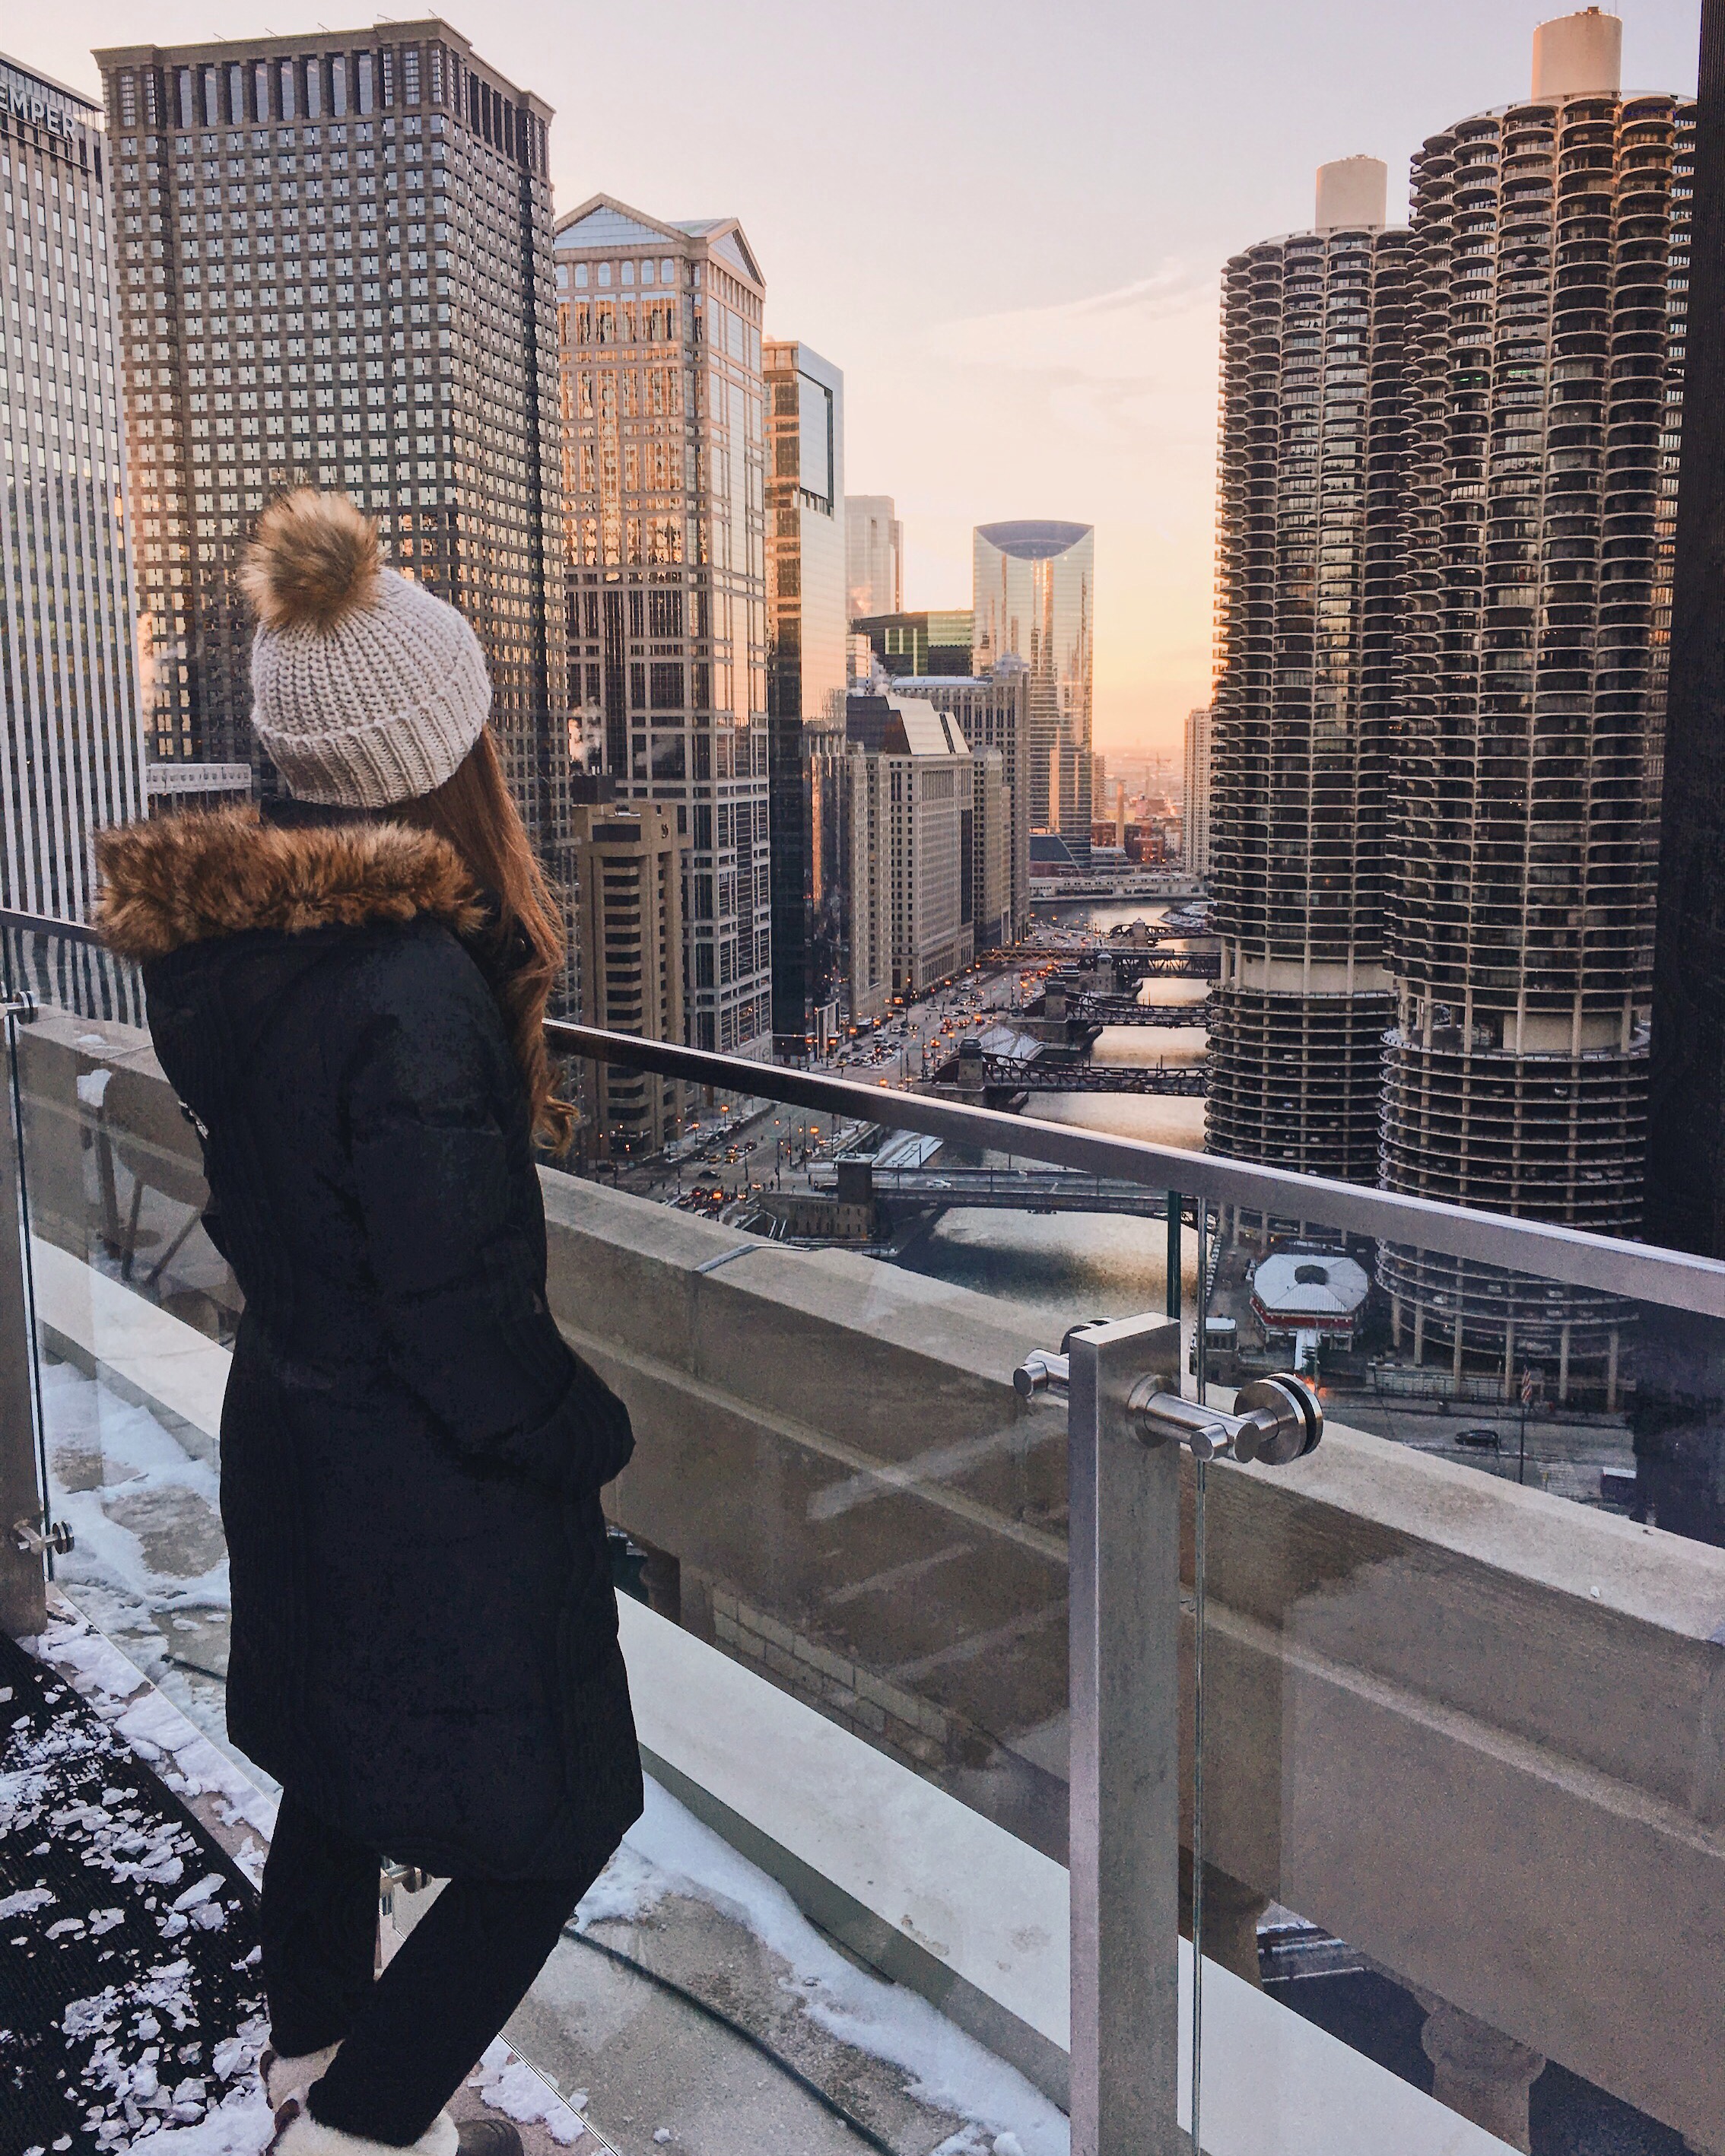 5 Things to do in Chicago during winter